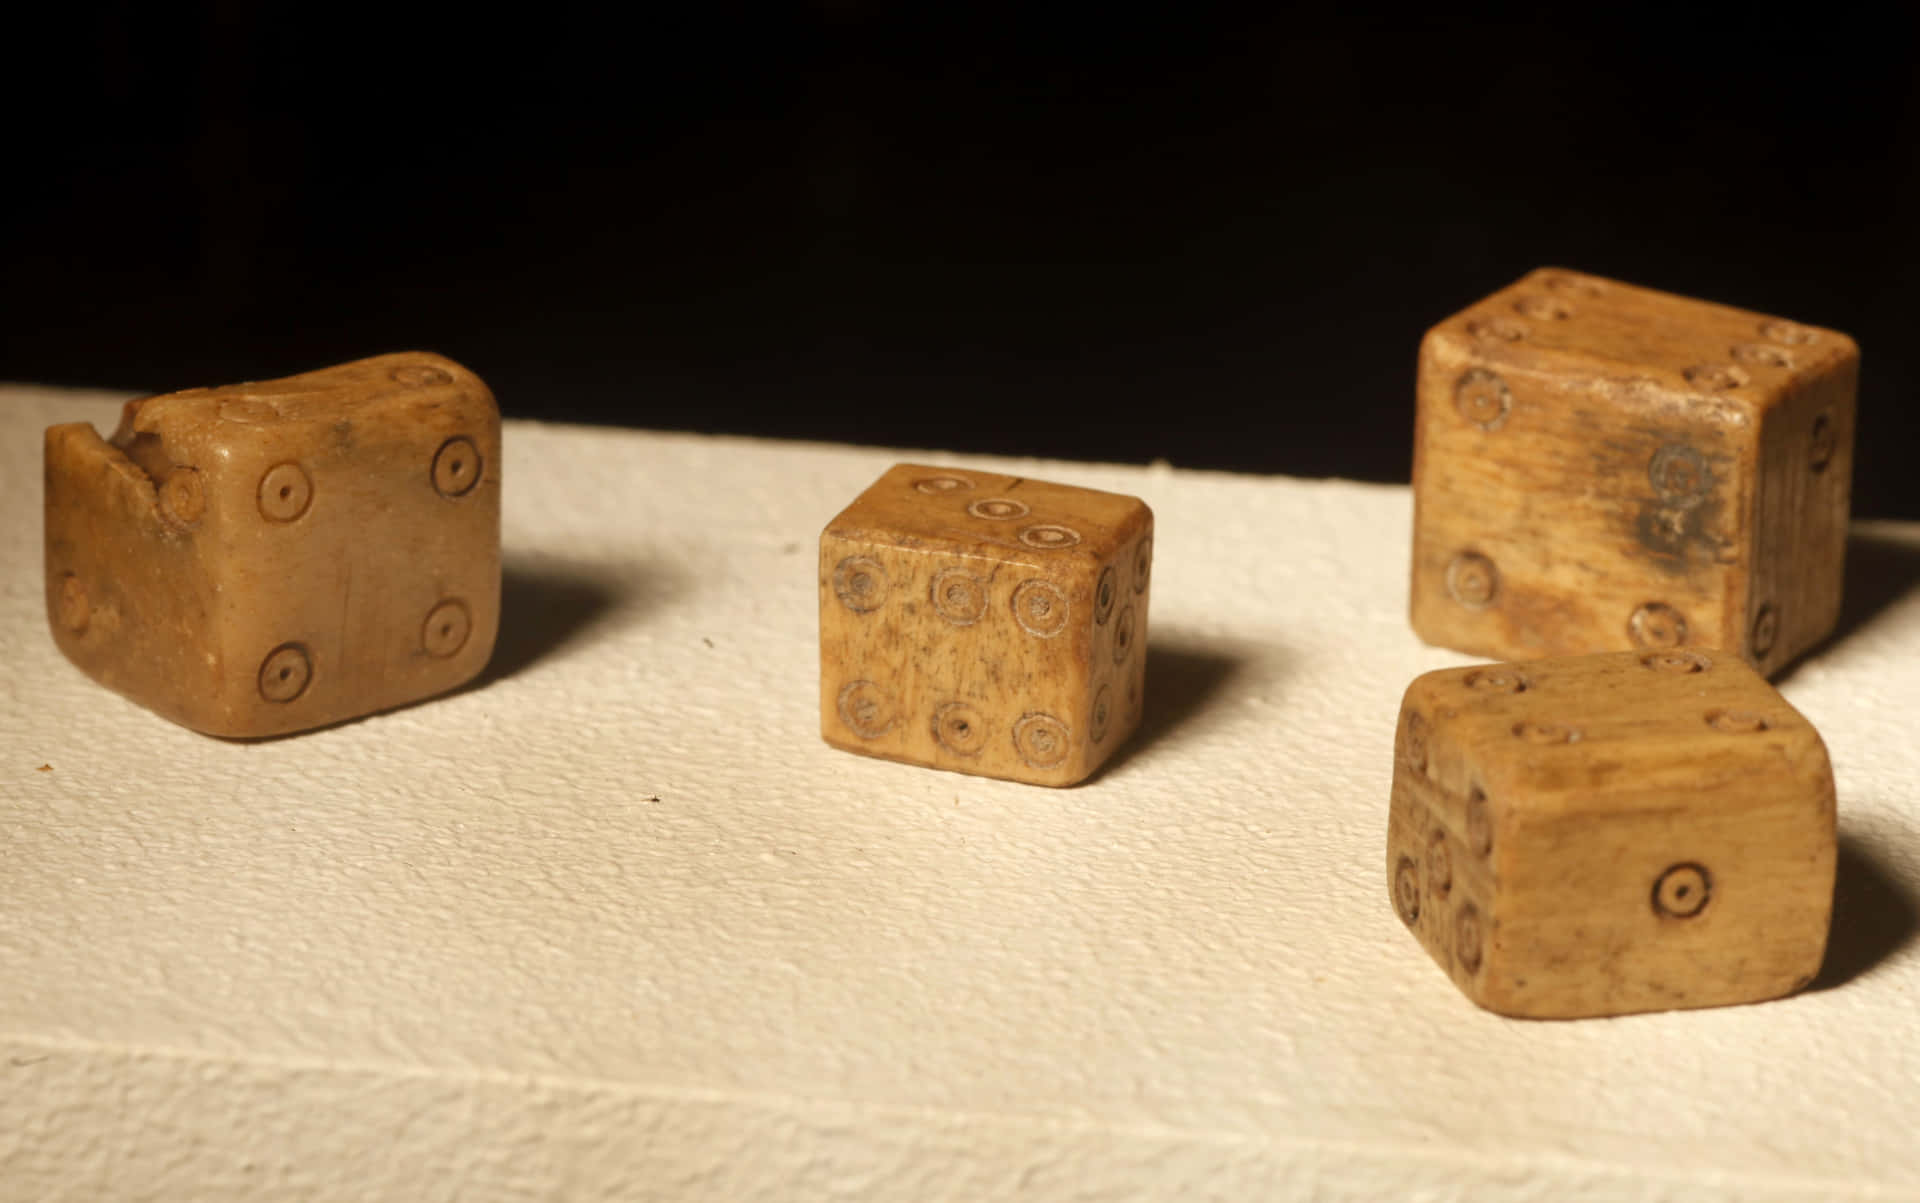 A Set Of Wooden Dice On A Table